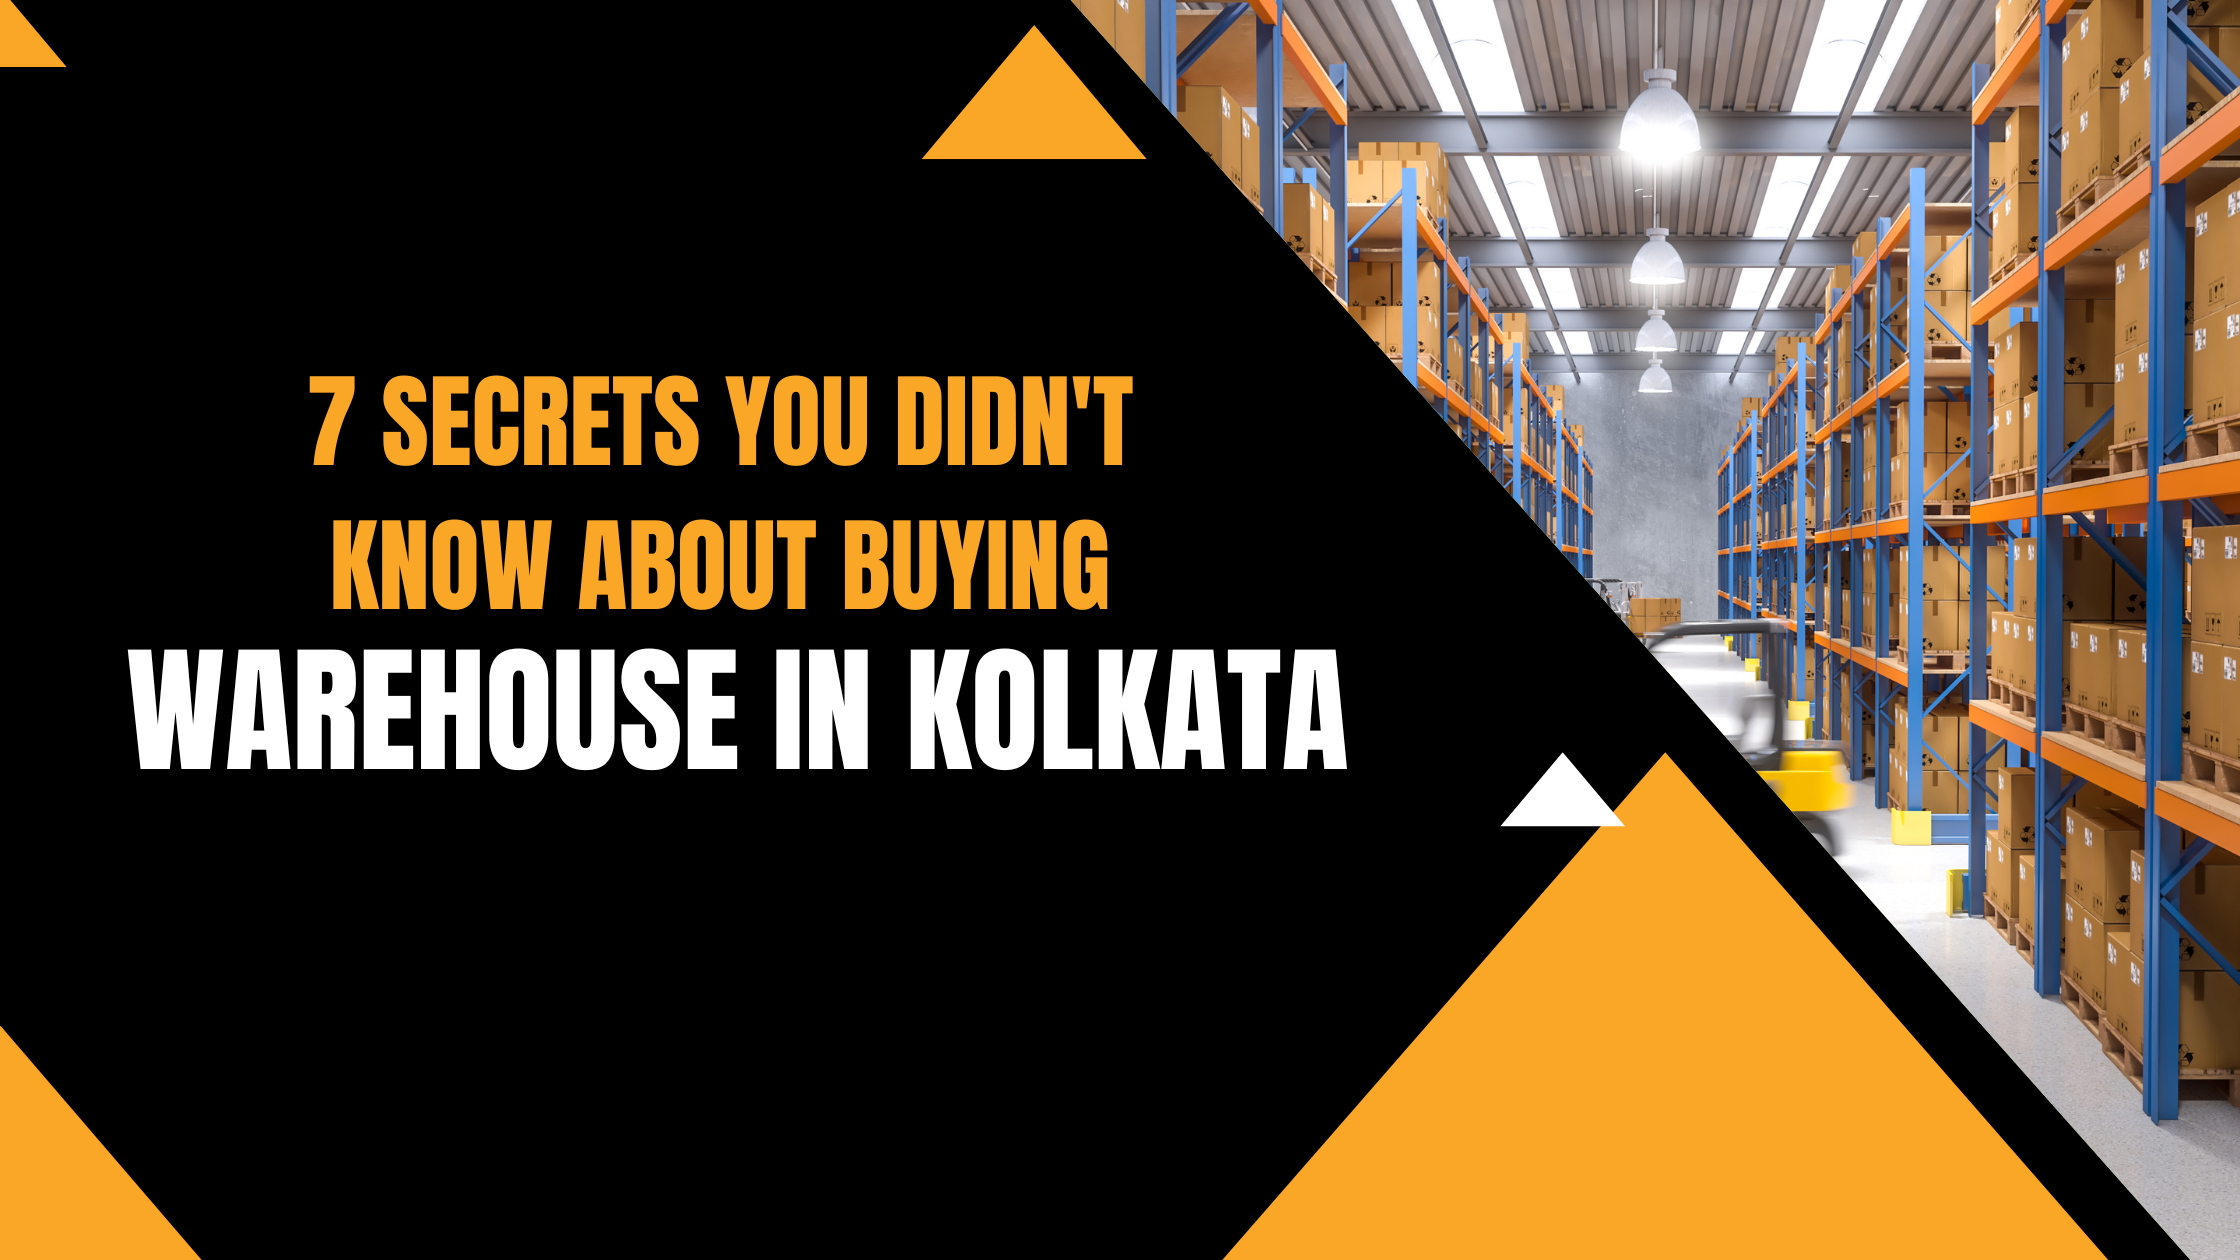 7 Secrets You Didn't Know About Buying Warehouse In Kolkata